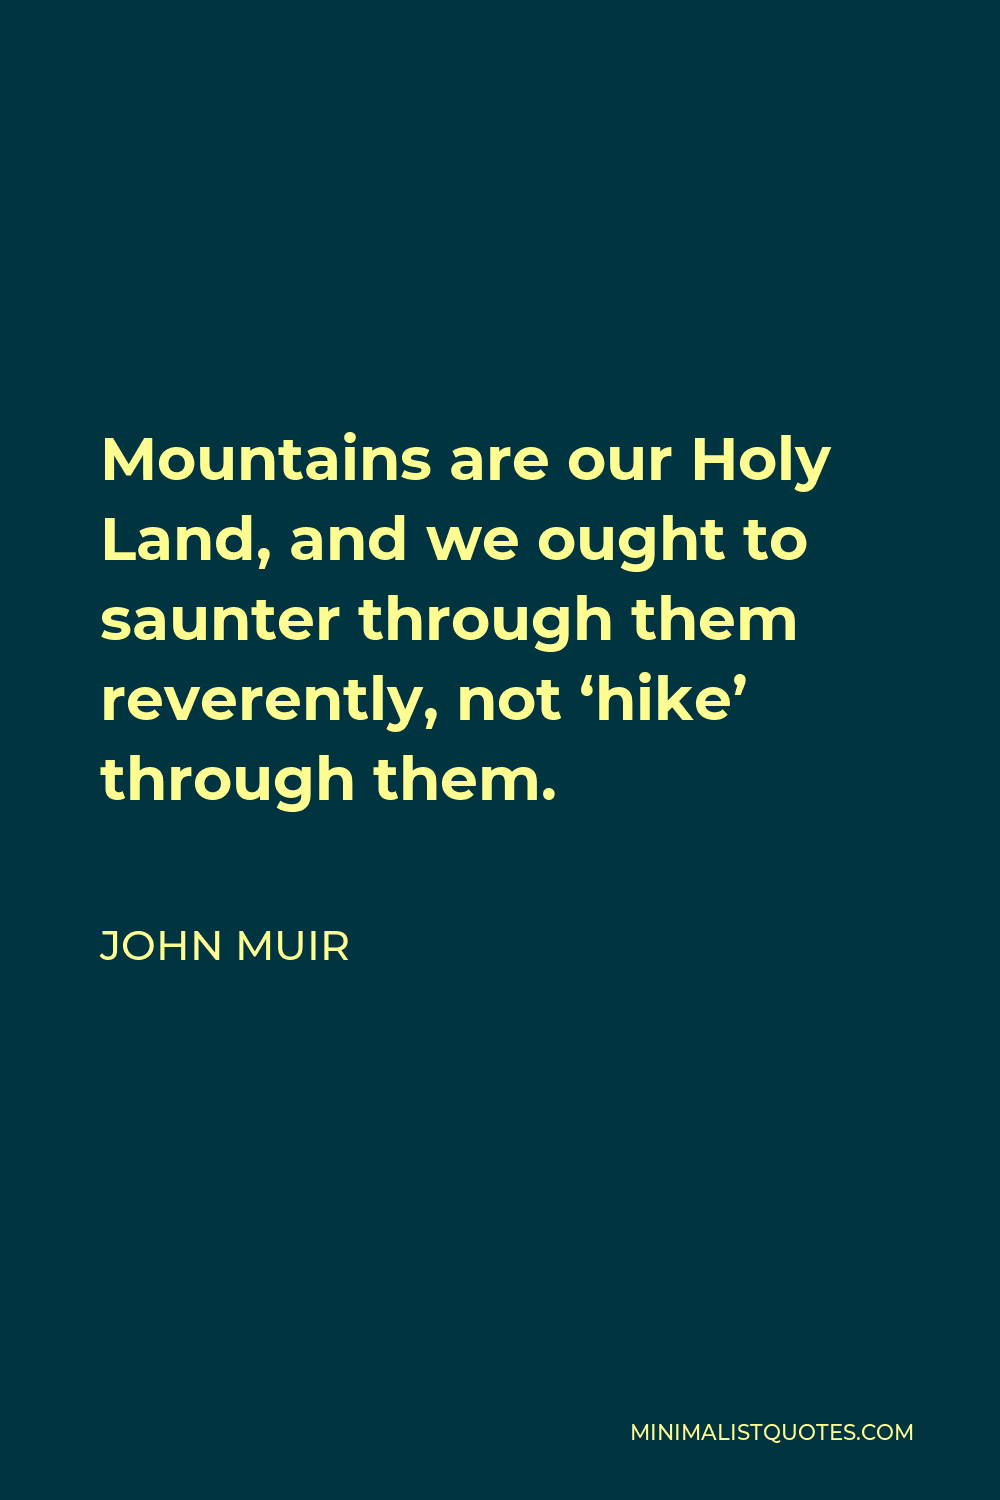 John Muir Quote - Mountains are our Holy Land, and we ought to saunter through them reverently, not ‘hike’ through them.